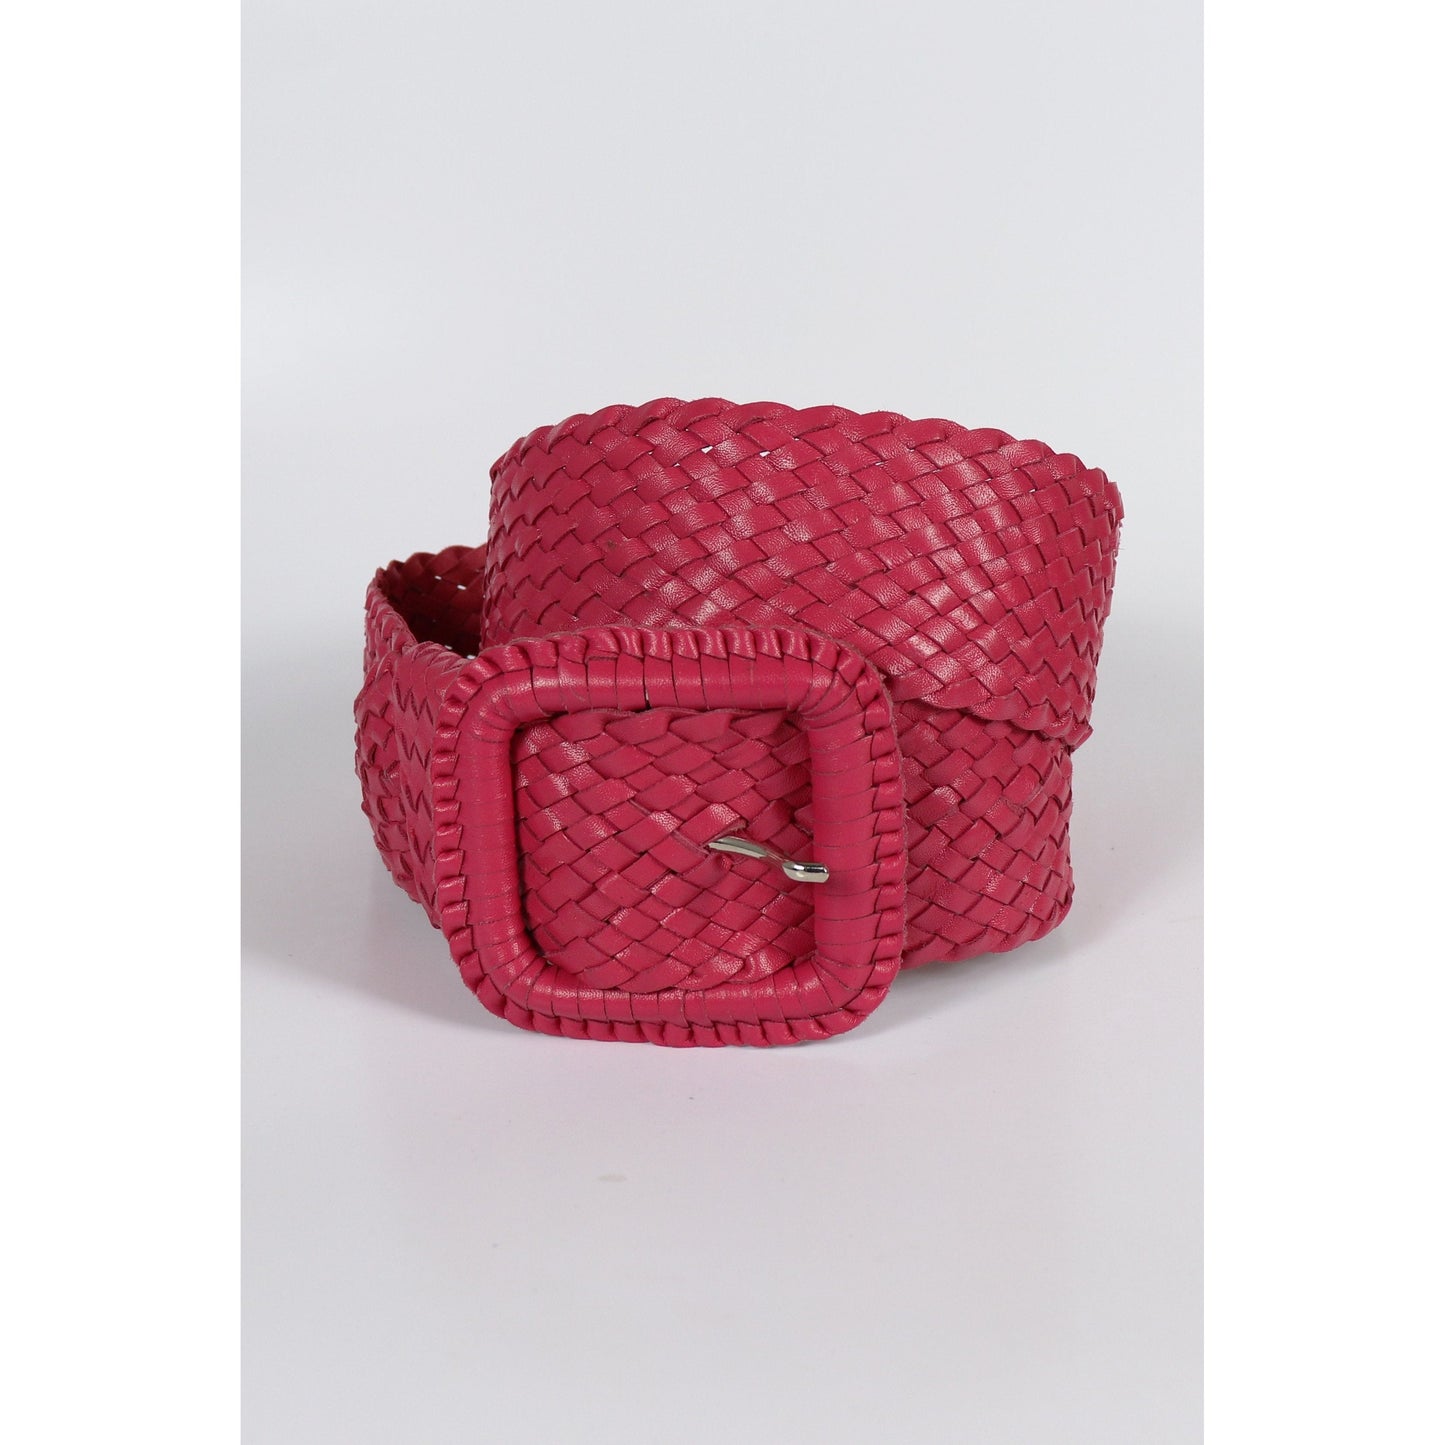 Red woven leather belt isolated.